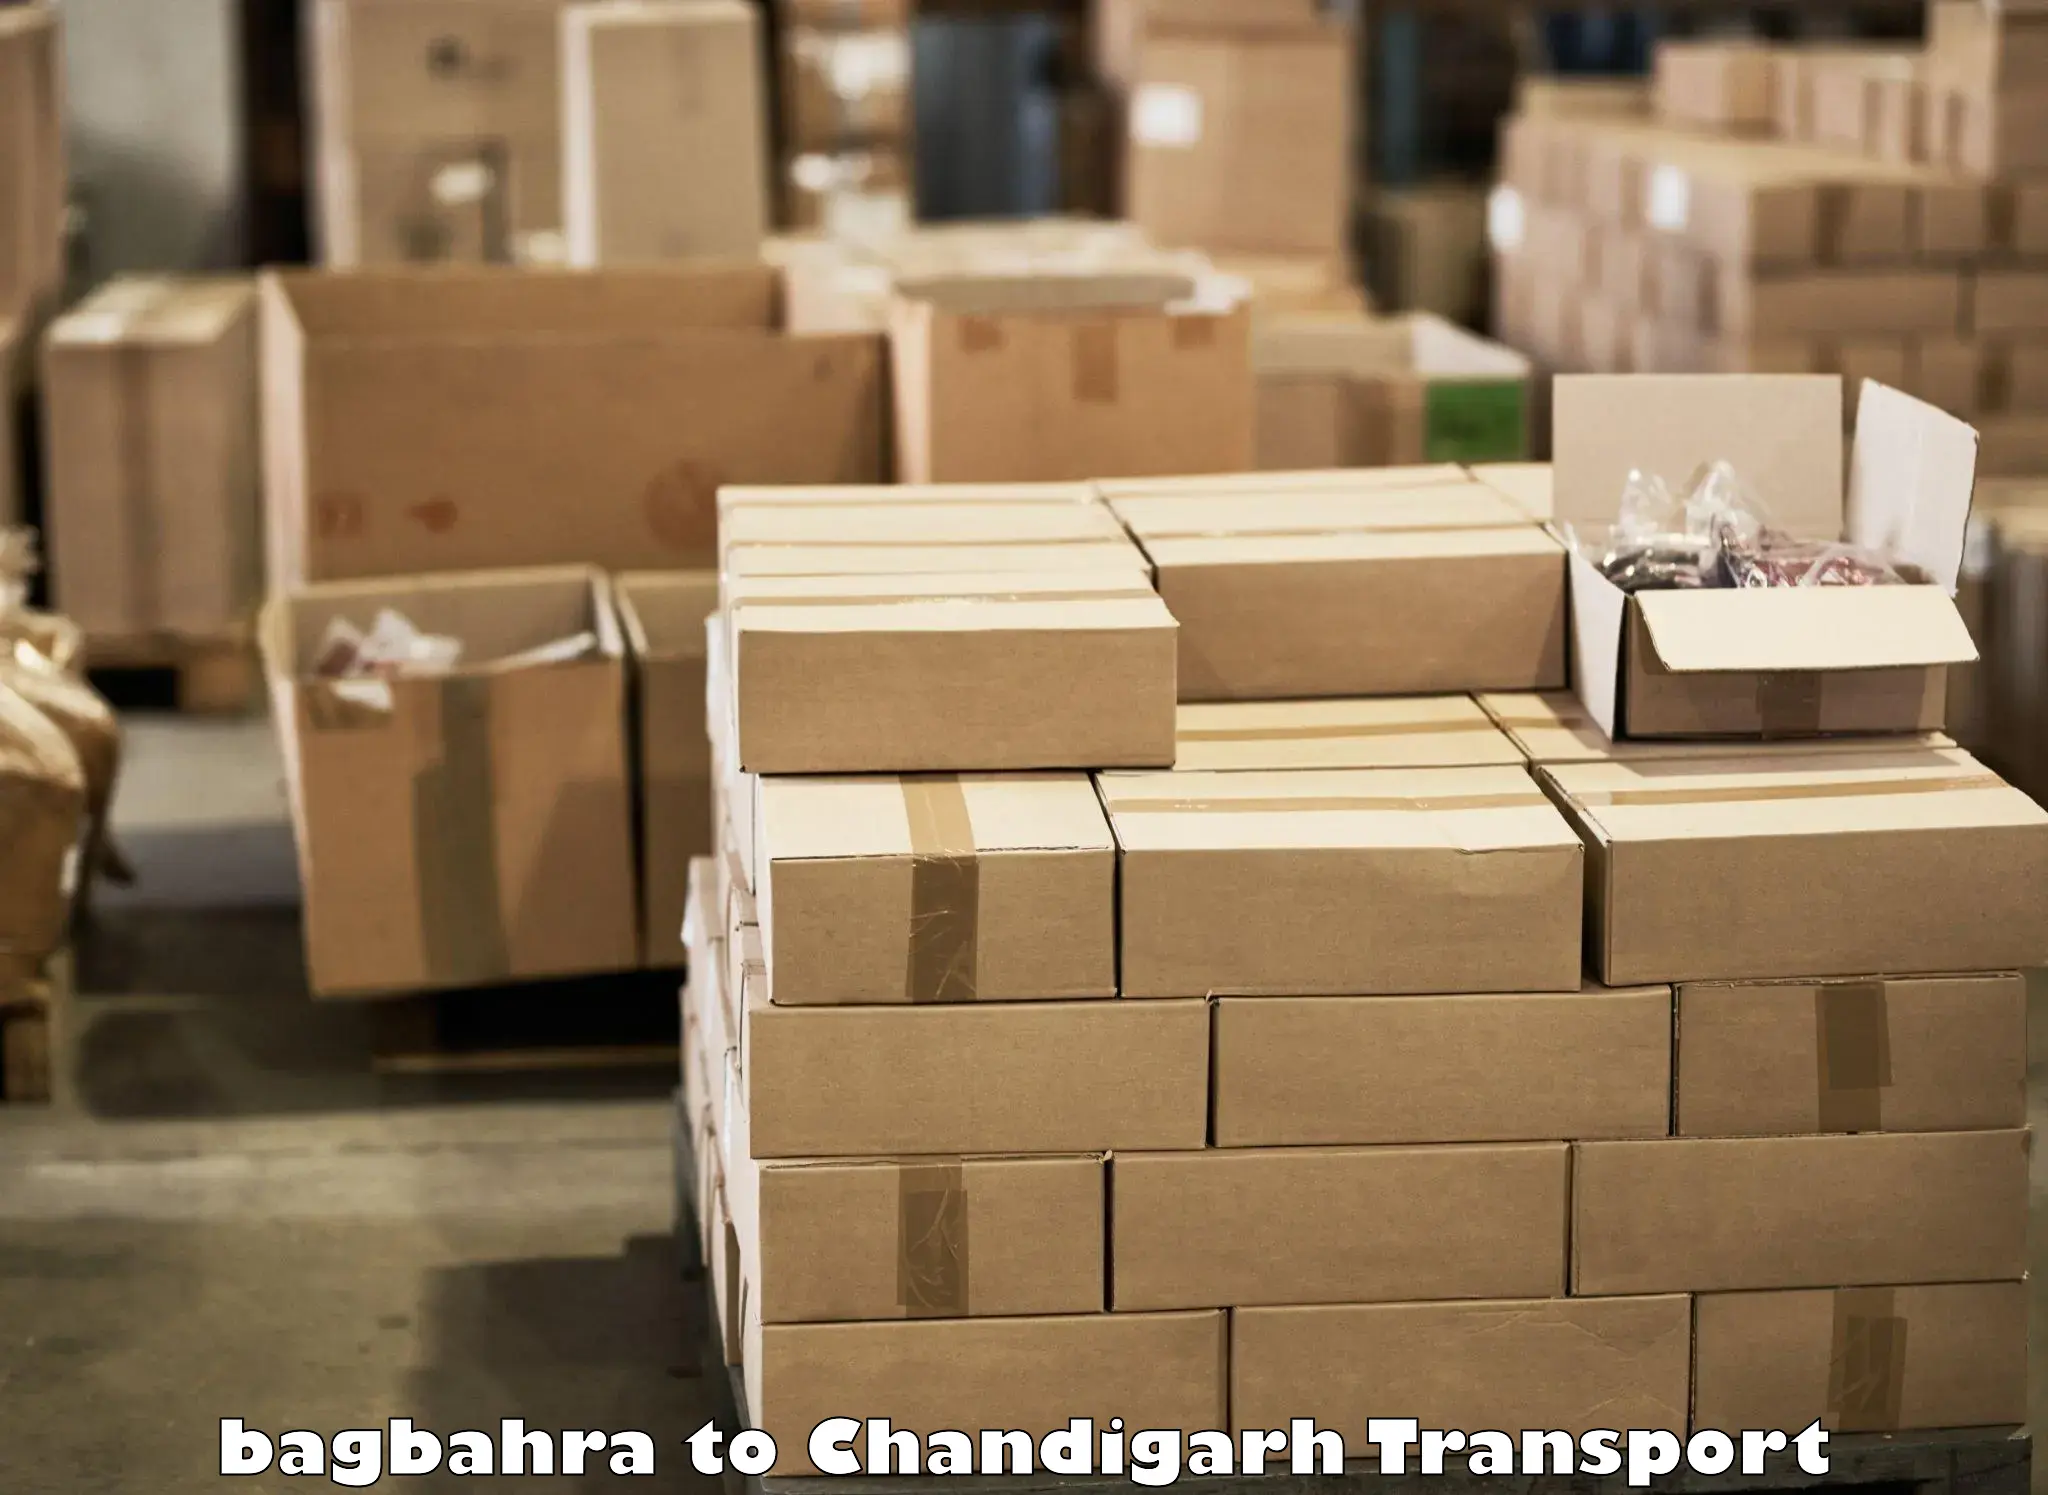 Material transport services bagbahra to Chandigarh